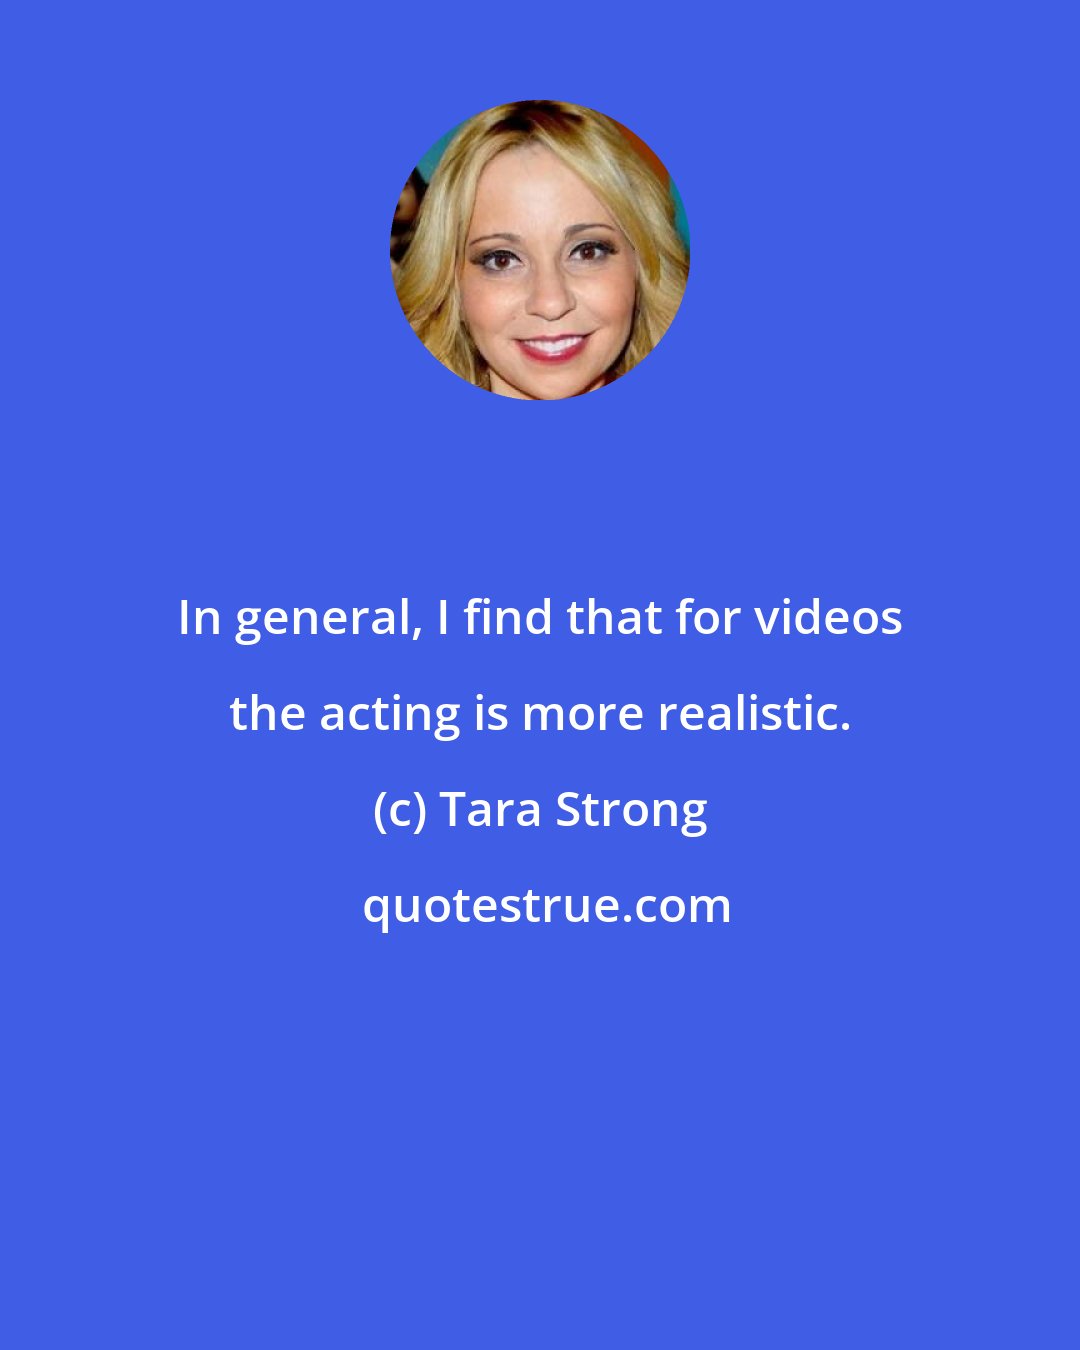 Tara Strong: In general, I find that for videos the acting is more realistic.